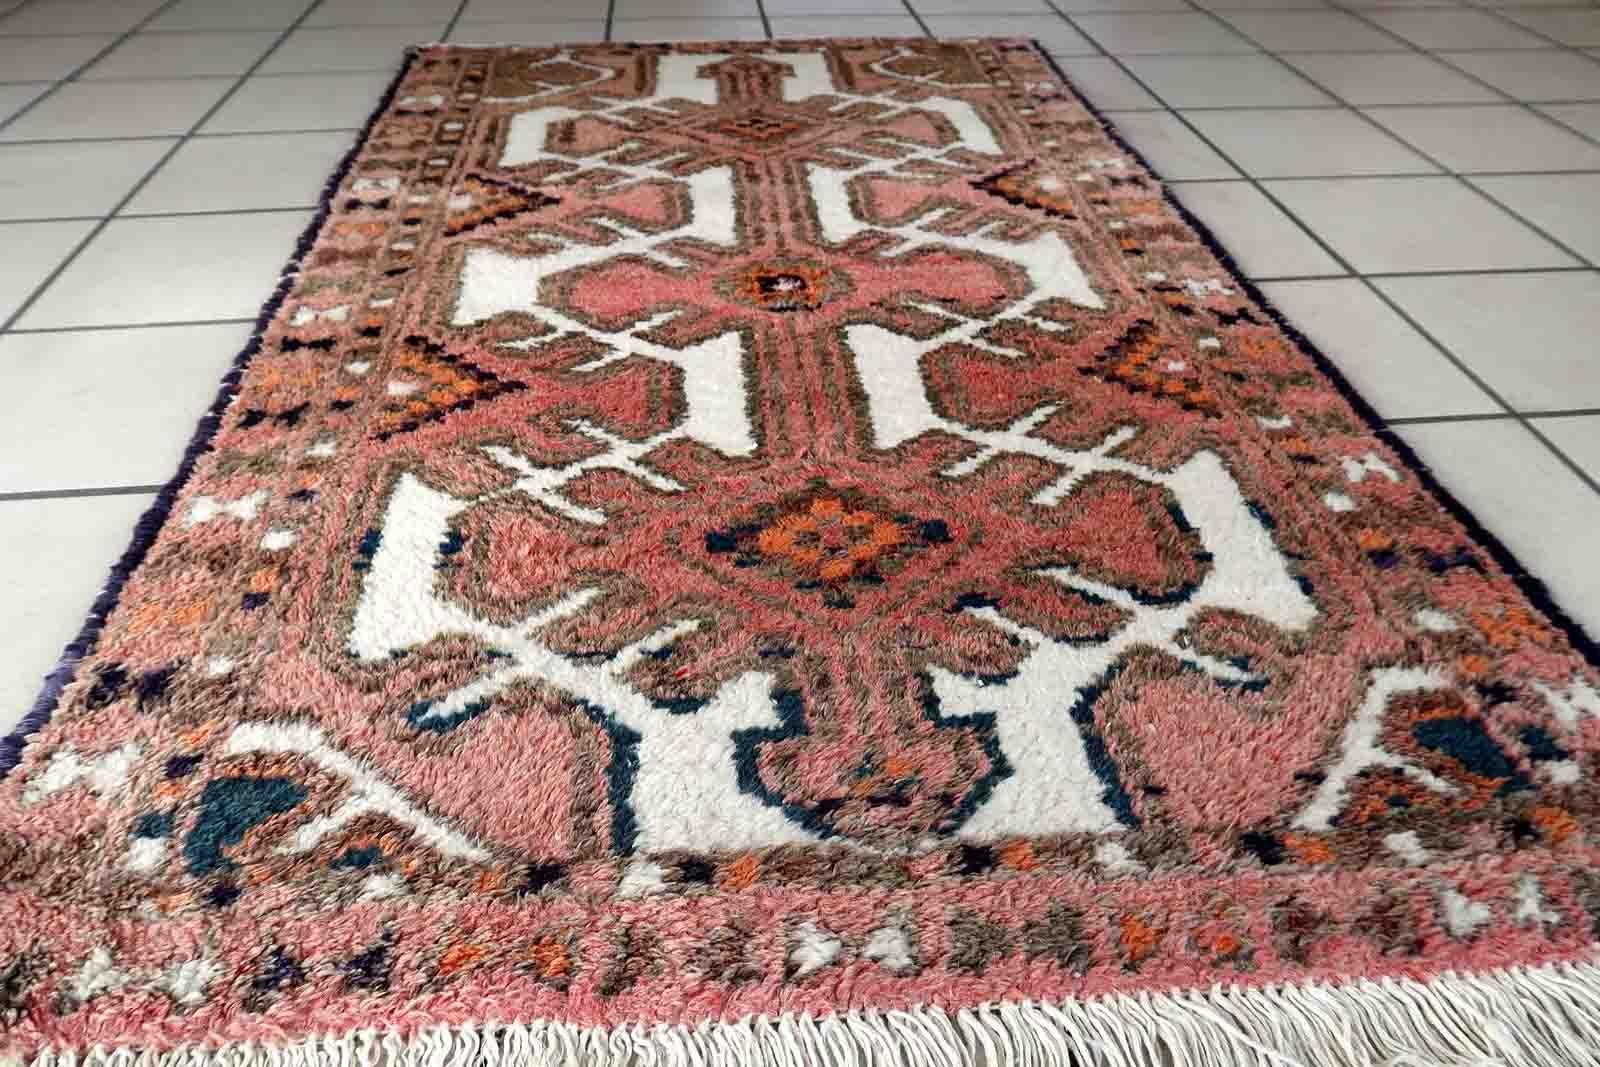 Handmade vintage Hamadan rug with medallion design. The rug is in original good condition from the end of 20th century.

-condition: original good,

-circa: 1970s,

-size: 2.3' x 3.9' (72cm x 121cm),

-material: wool,

-country of origin: Middle